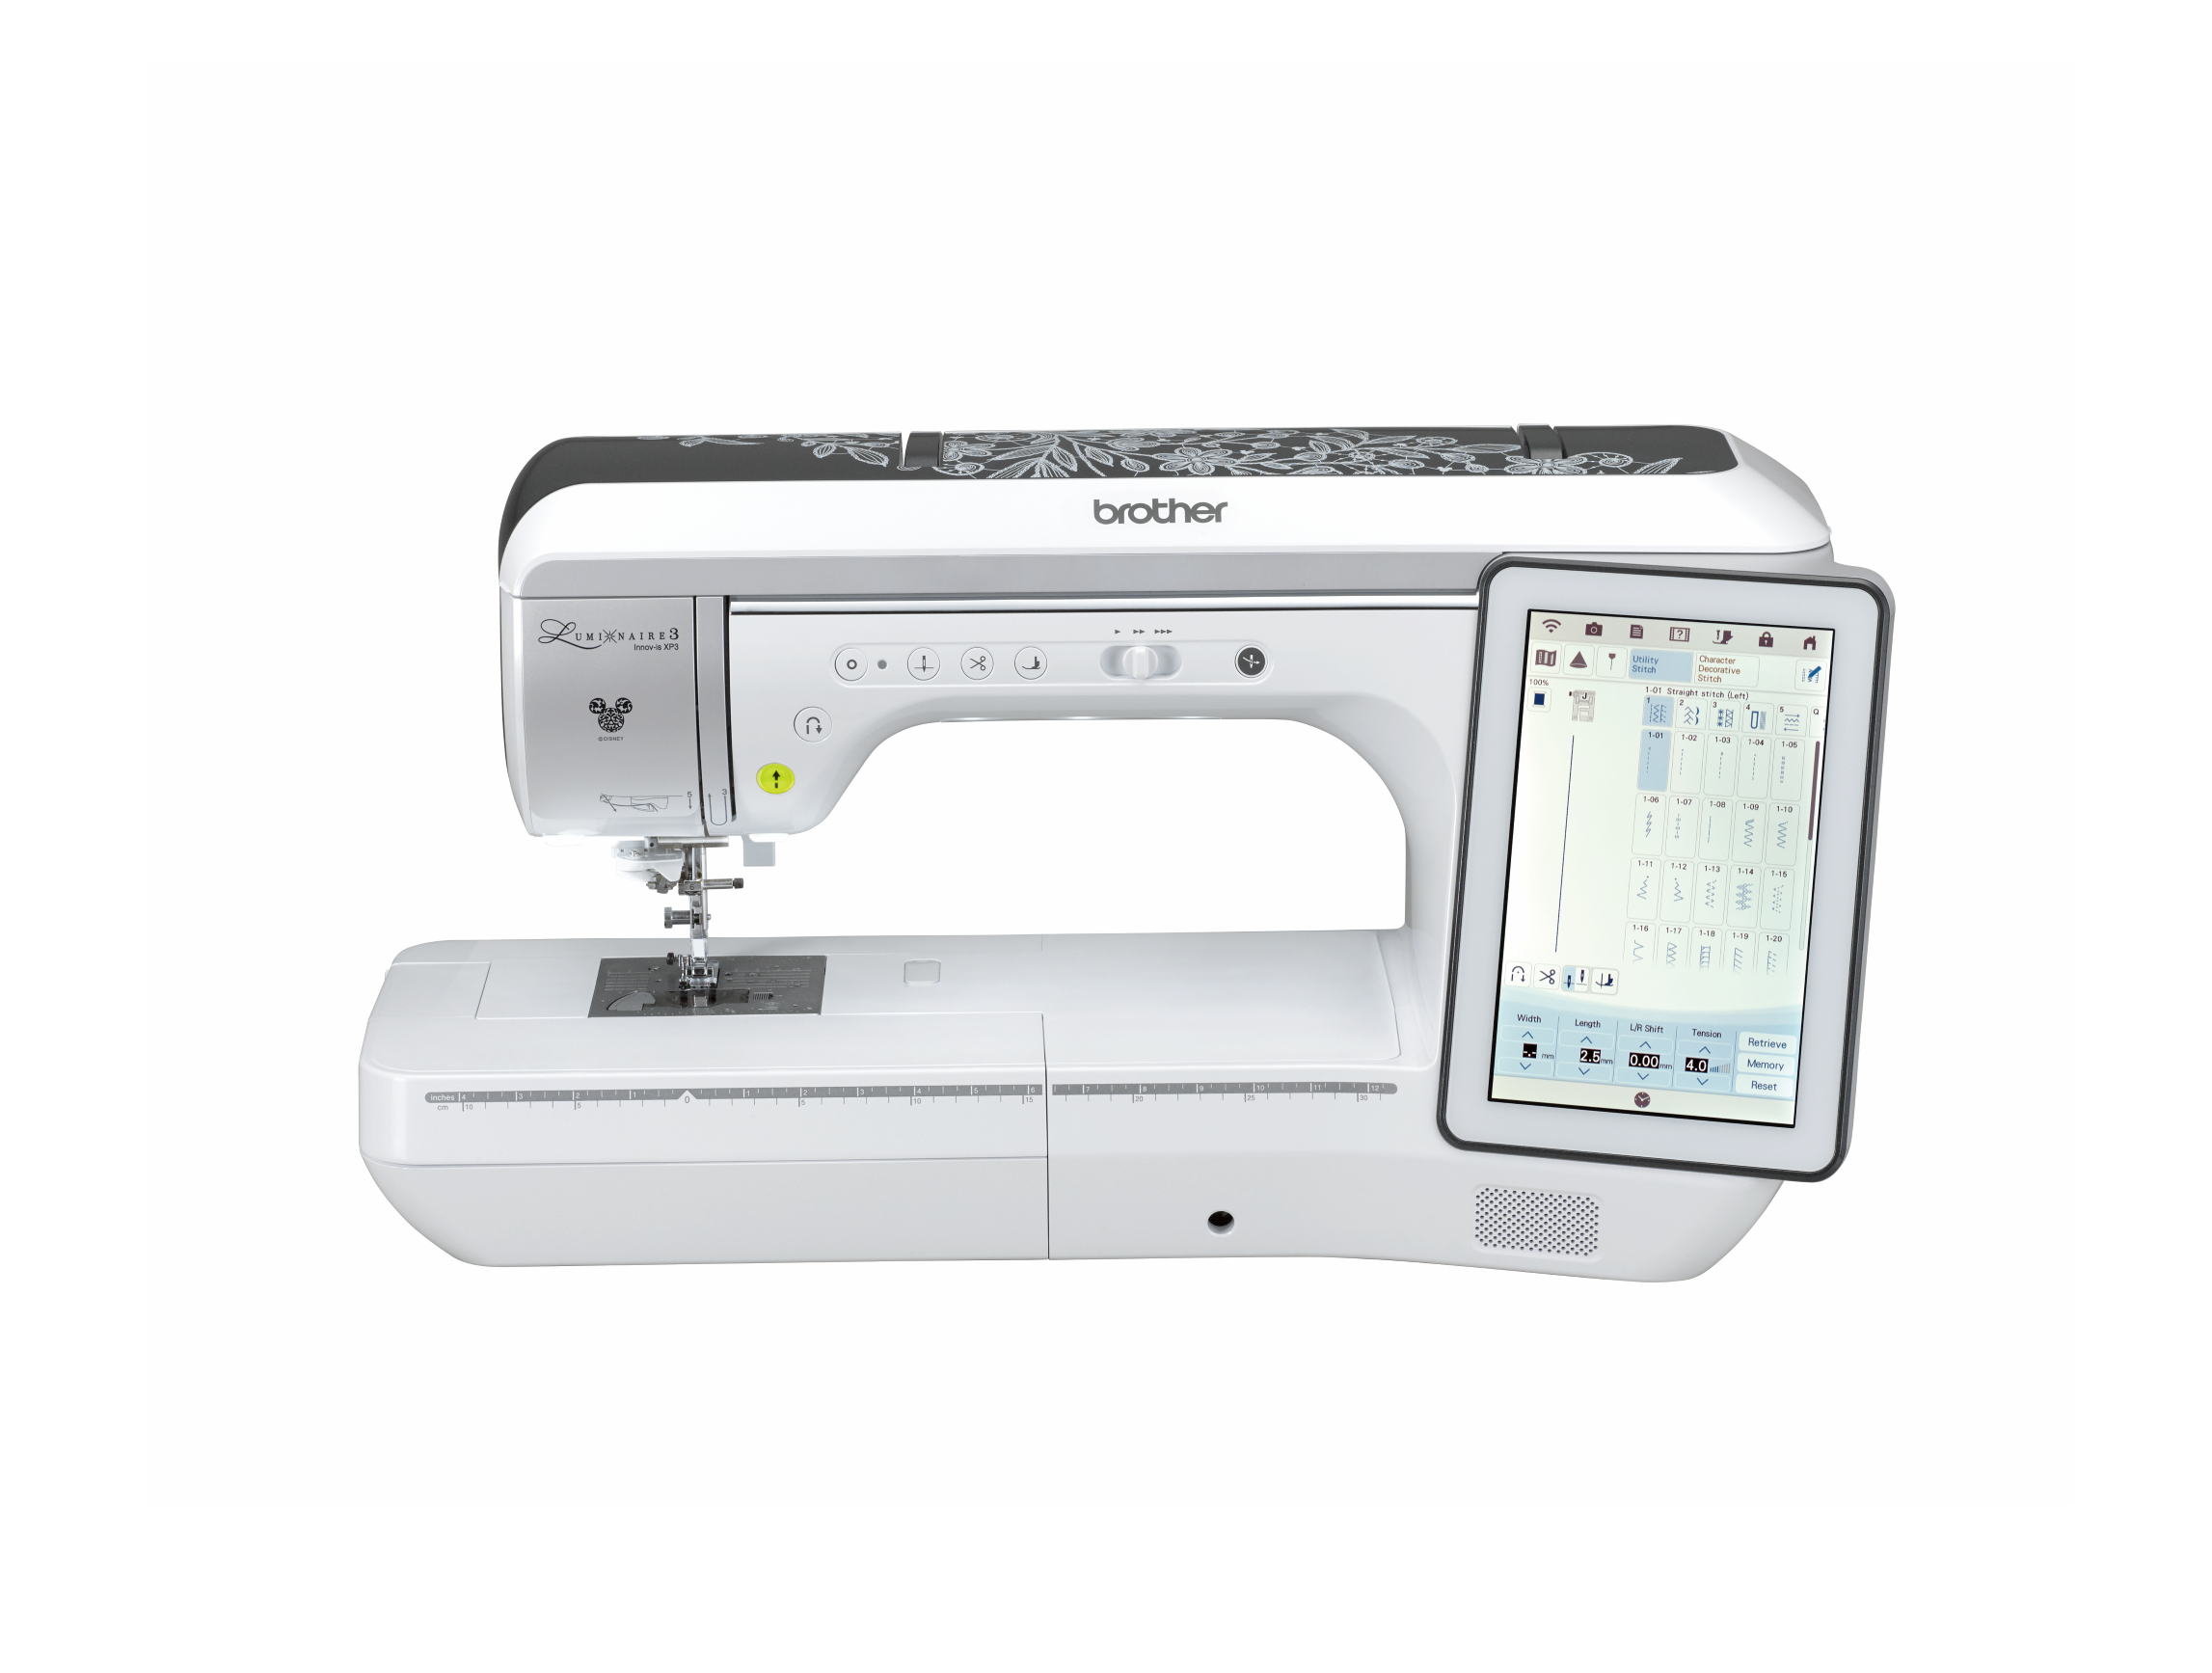 Brother Luminaire 3 Innov-is XP3 Sewing and Embroidery Machine 16x10.5 for Sale at World Weidner